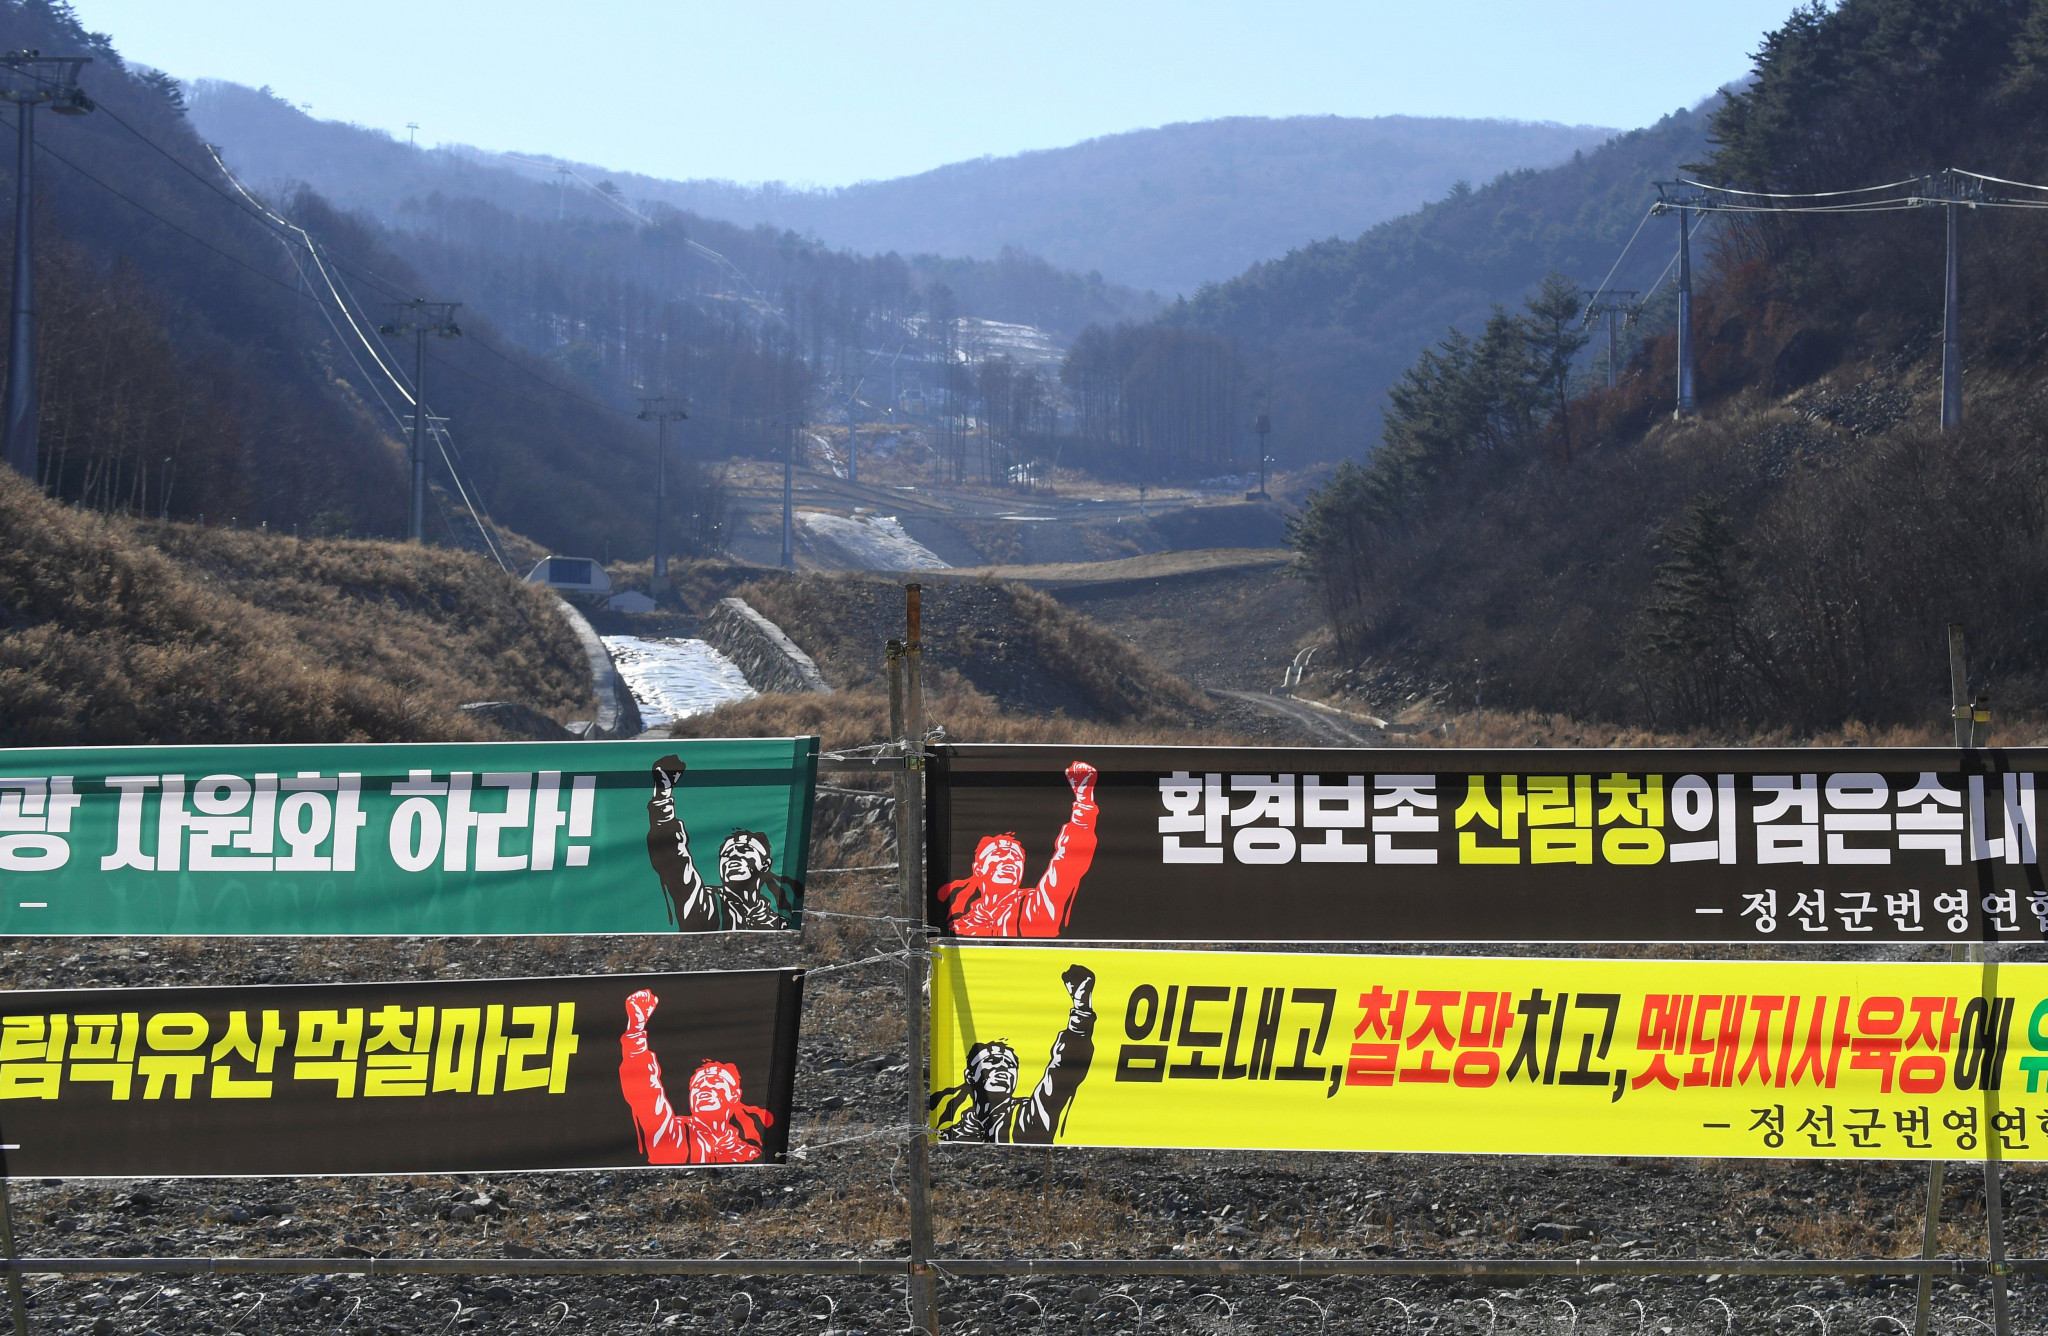 Protest banners demanding the development of the Jeongseon Alpine Centre, where Alpine skiing events were held during Pyeongchang 2018, but which is now at the centre of a row about its future ©Getty Images